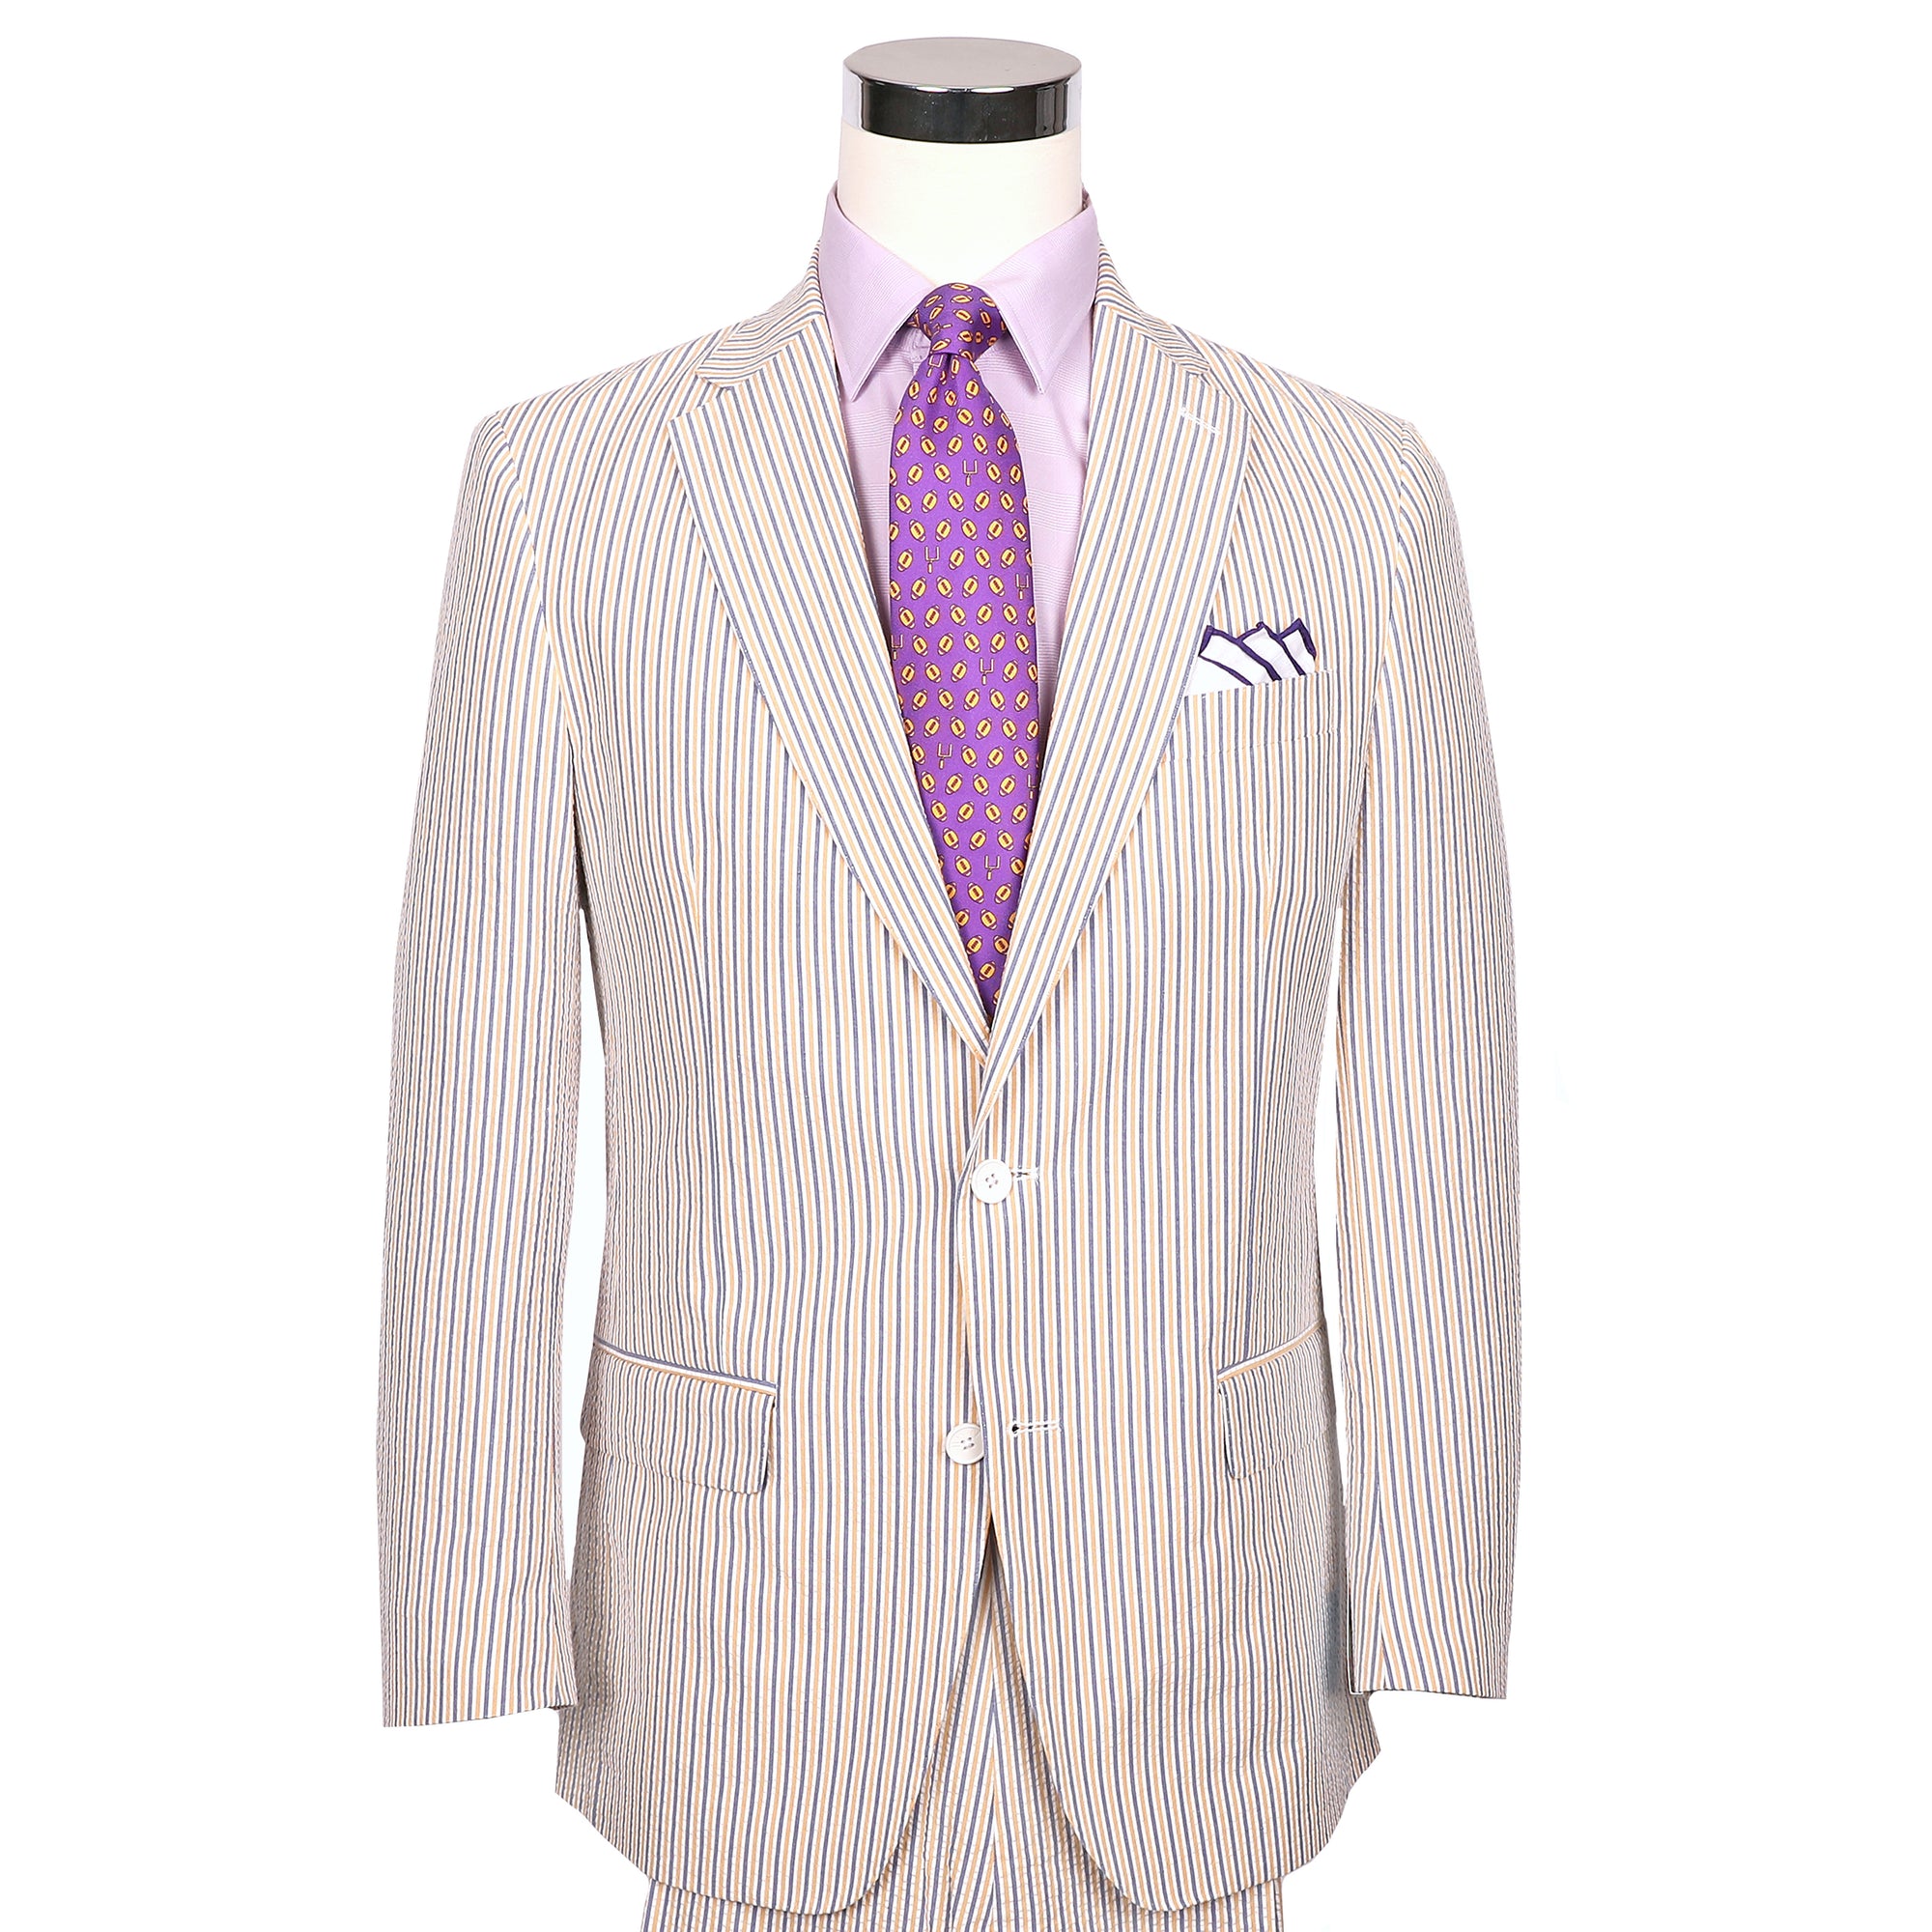 Show your purple & gold spirit in our Audubon Purple & Gold Seersucker Suit.  ** Pant waist is 6" smaller than the chest measurement. For example, if you order a 40R jacket, the pant size will be 34 **  100% Cotton Haspel Exclusive Seersucker • Maximized Seersucker Pucker • Audubon Classic Fit • Natural Shoulder • Two Buttons • Flap Pockets • 3/4 Lined for Maximum Cool • Side Vents • Notch Lapel • Dry Clean • Imported